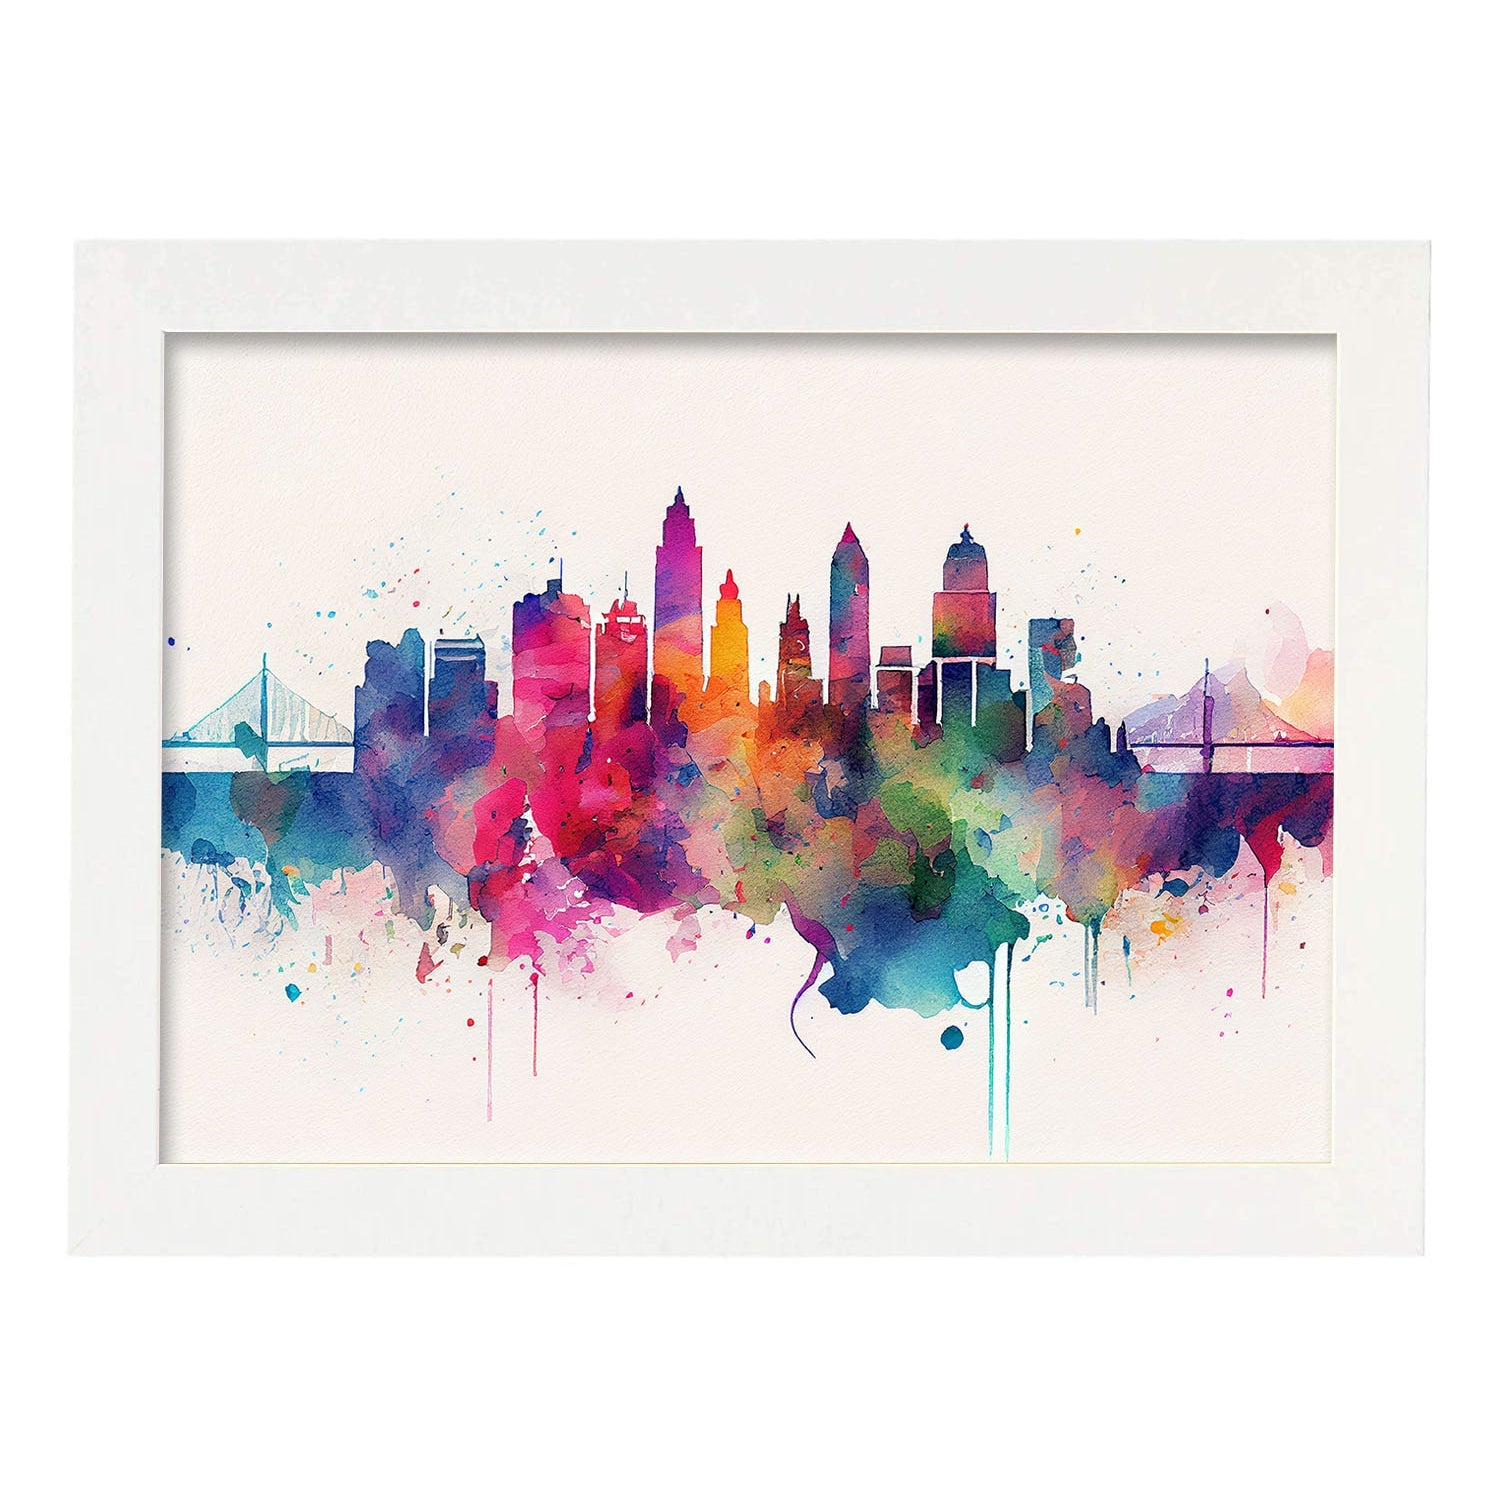 Nacnic watercolor of a skyline of the city of St. Aesthetic Wall Art Prints for Bedroom or Living Room Design.-Artwork-Nacnic-A4-Marco Blanco-Nacnic Estudio SL